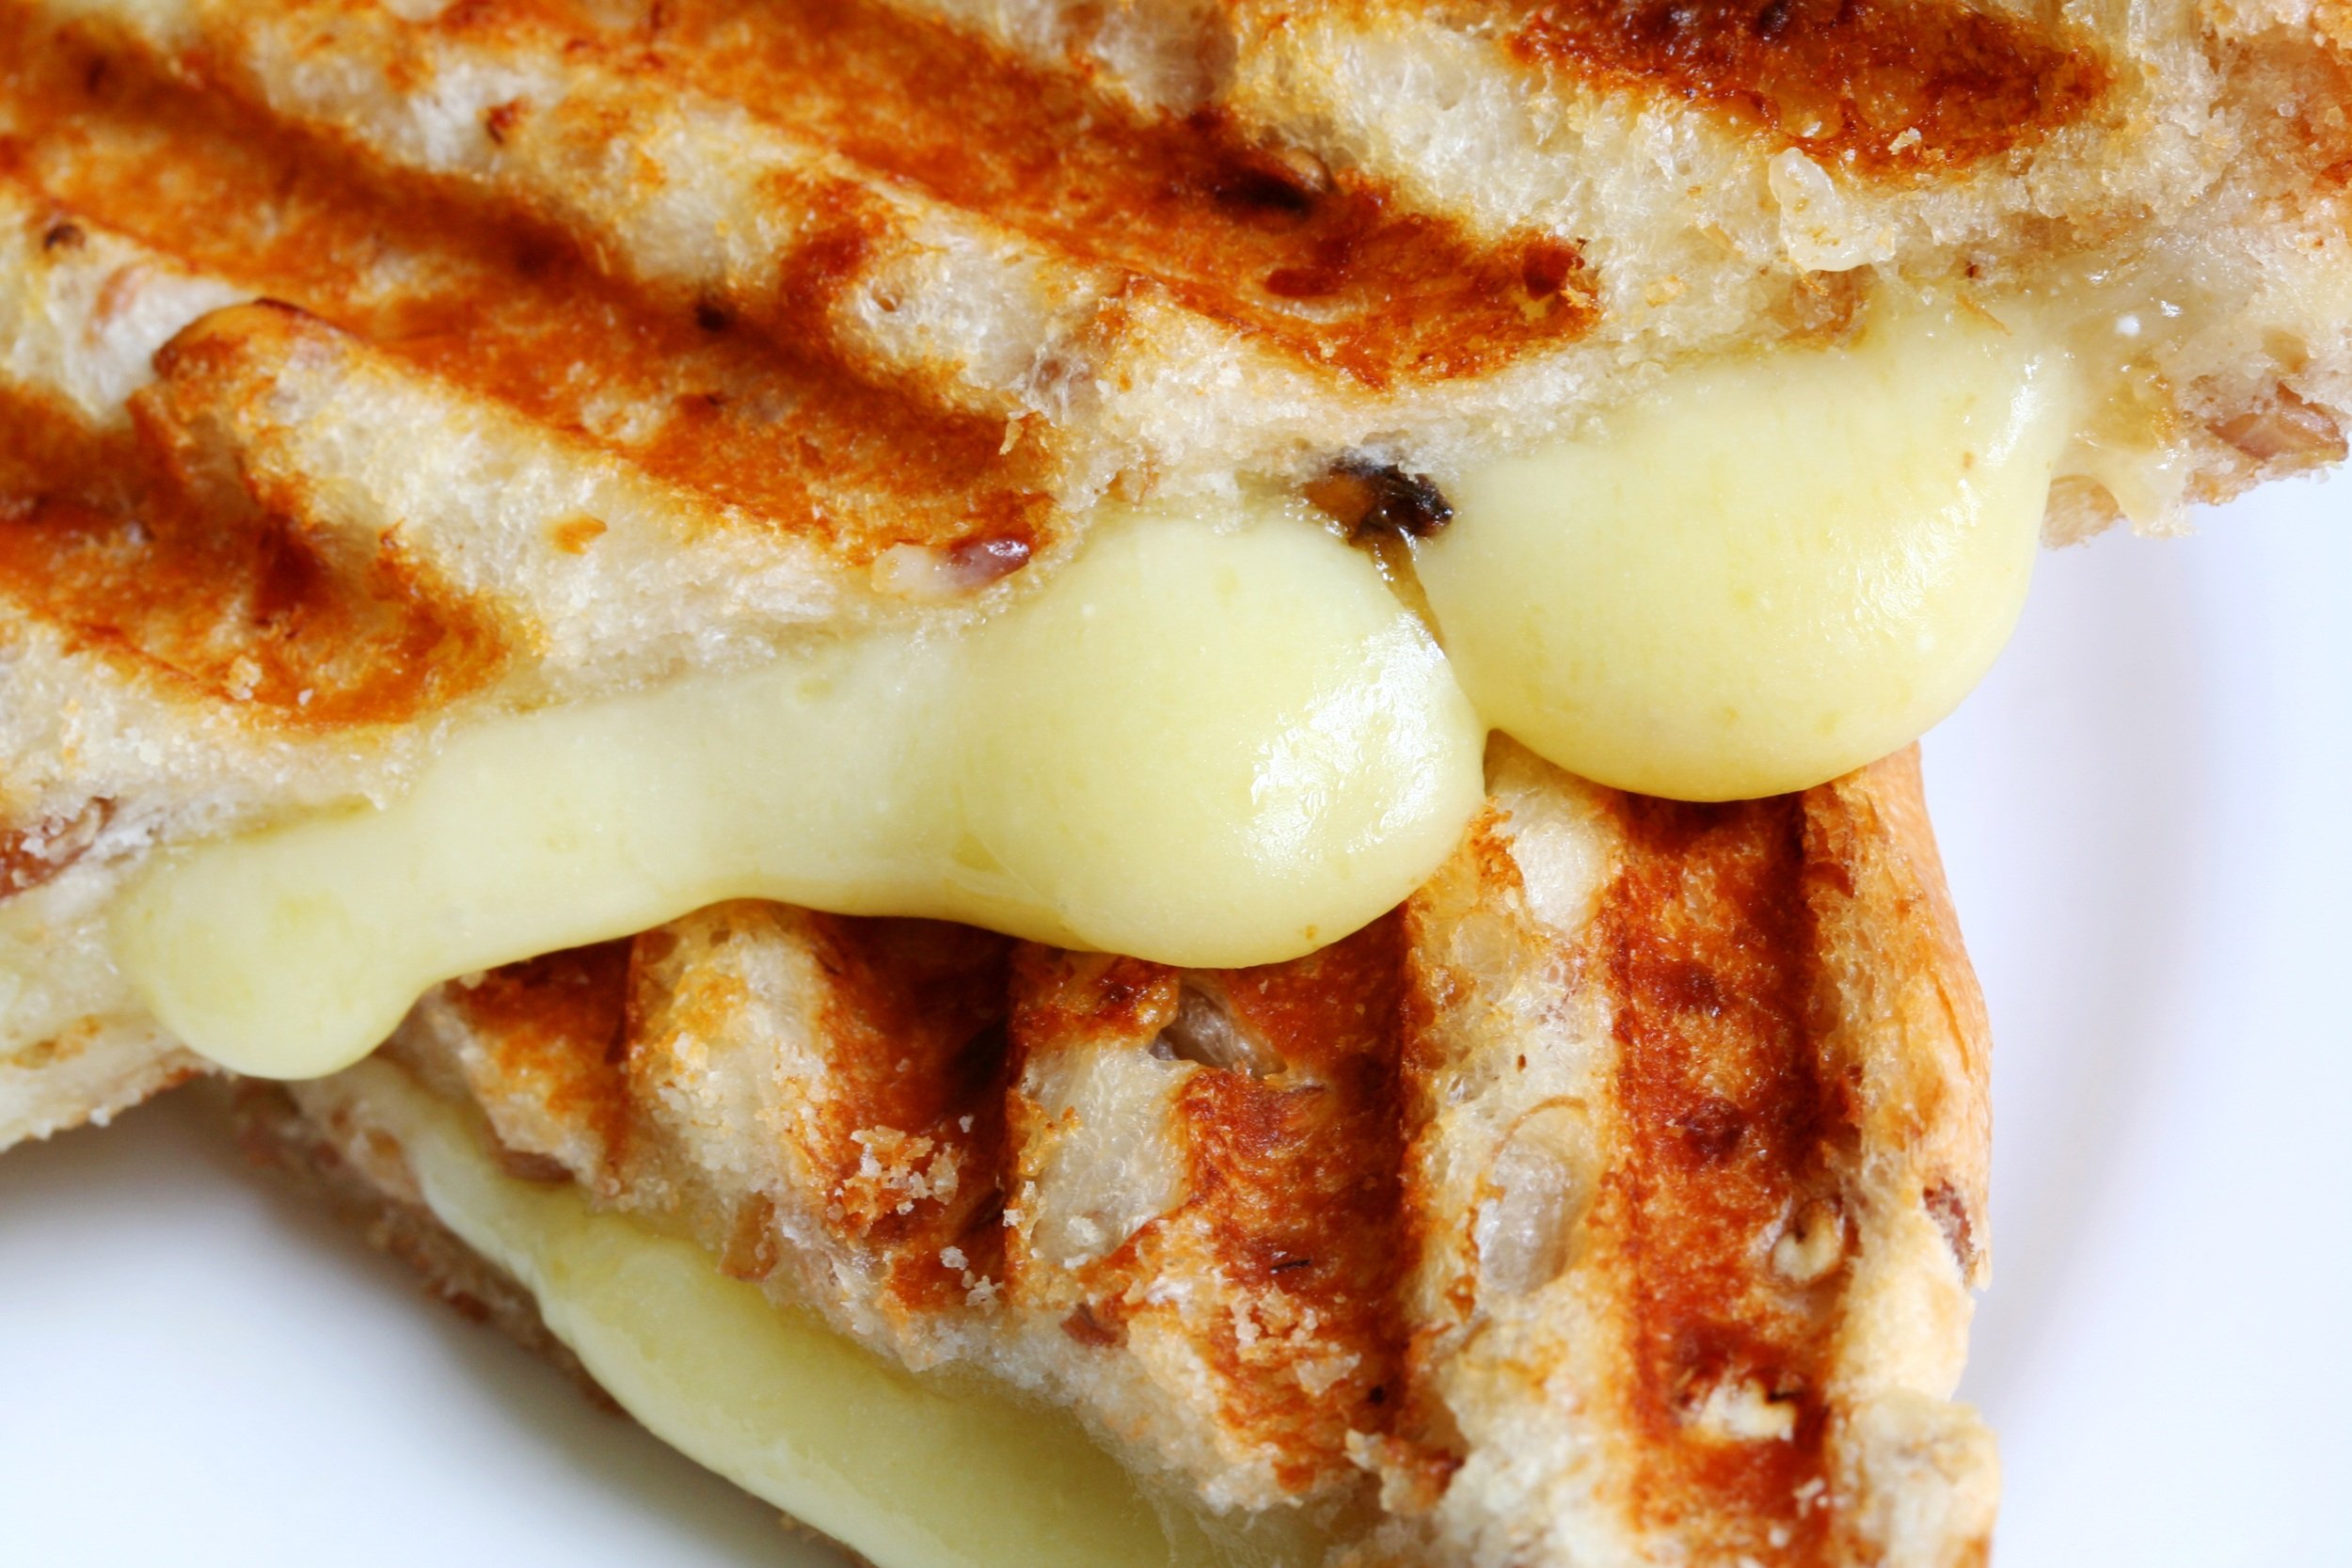 Grilled cheese goodness 